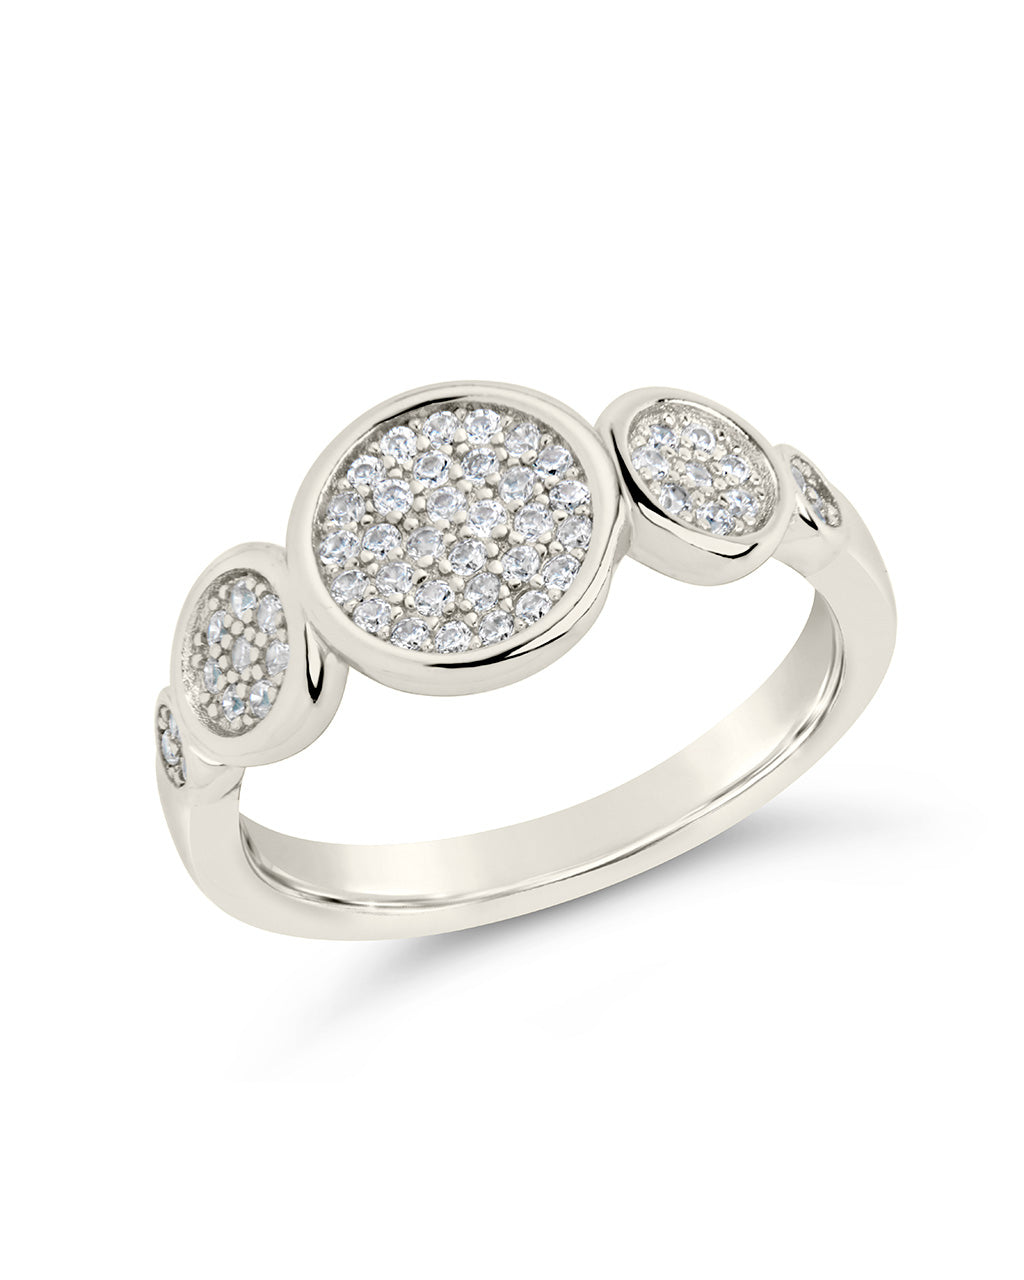 What Is My Ring Size? – Amy Jennifer Jewellery